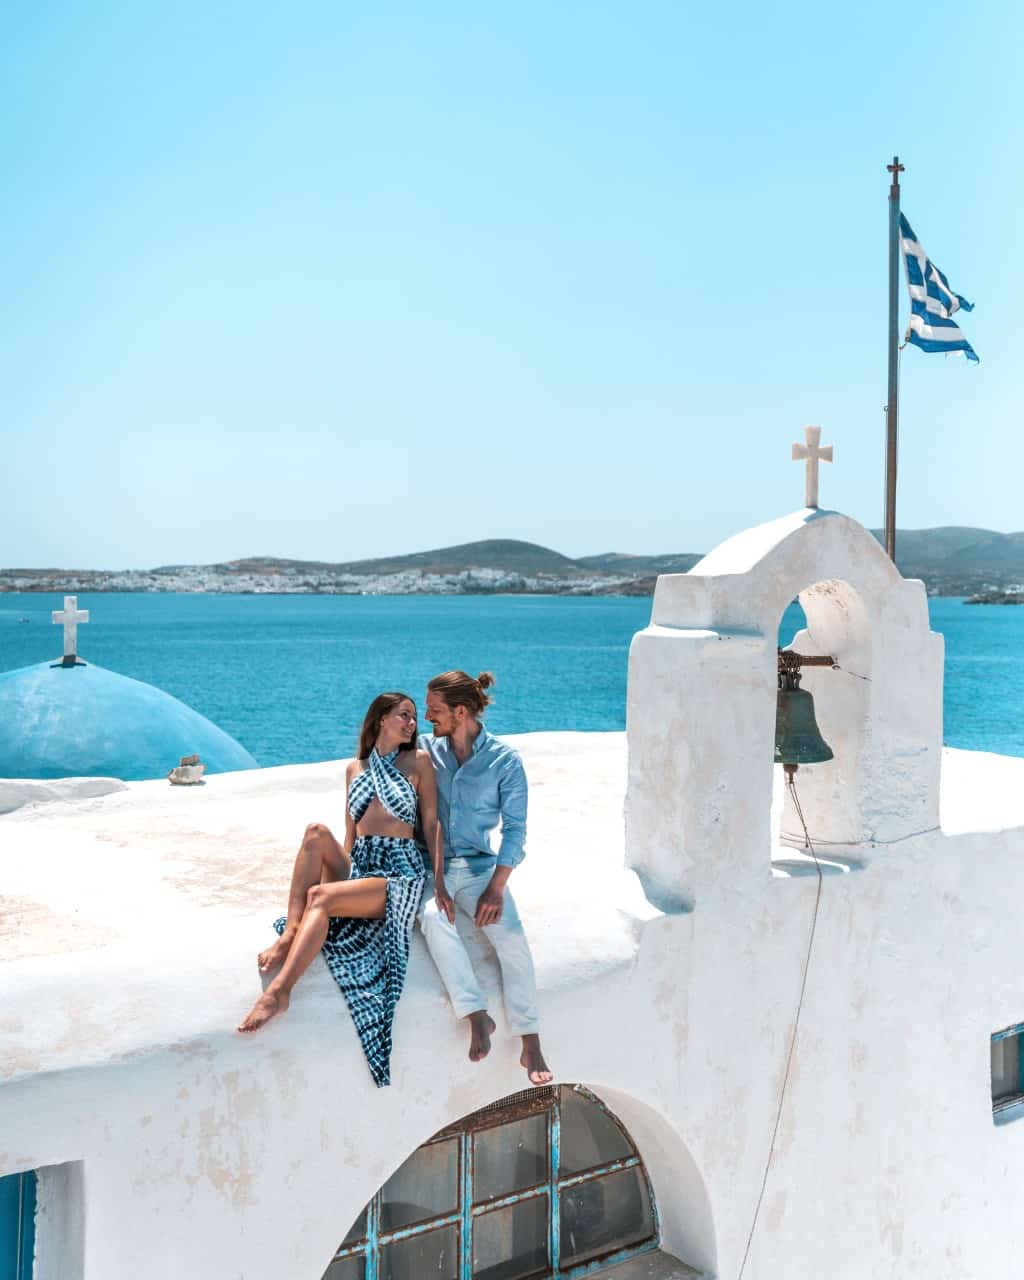 A photo of us sitting at the white-washed Monastery of St. John Deti in Paros, with its vibrant blue dome, a waving Greek flag, and the turqouise sea in the background.